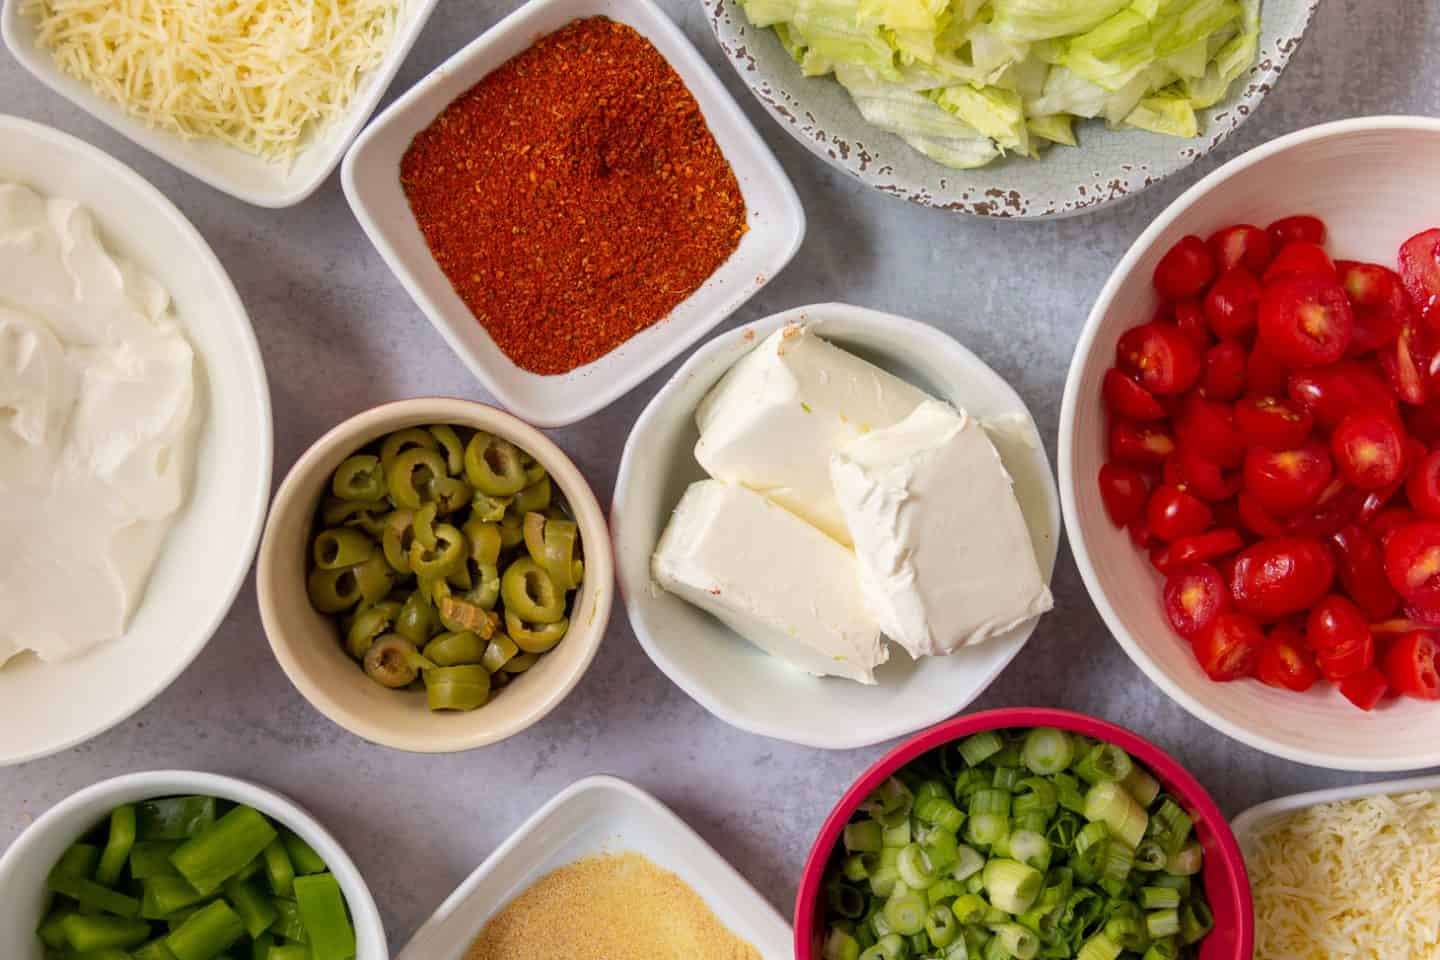 Topping options for Taco Dip: Cheddar cheese, Jack cheese, cherry tomatoes, iceberg lettuce, green onions, green peppers, olives